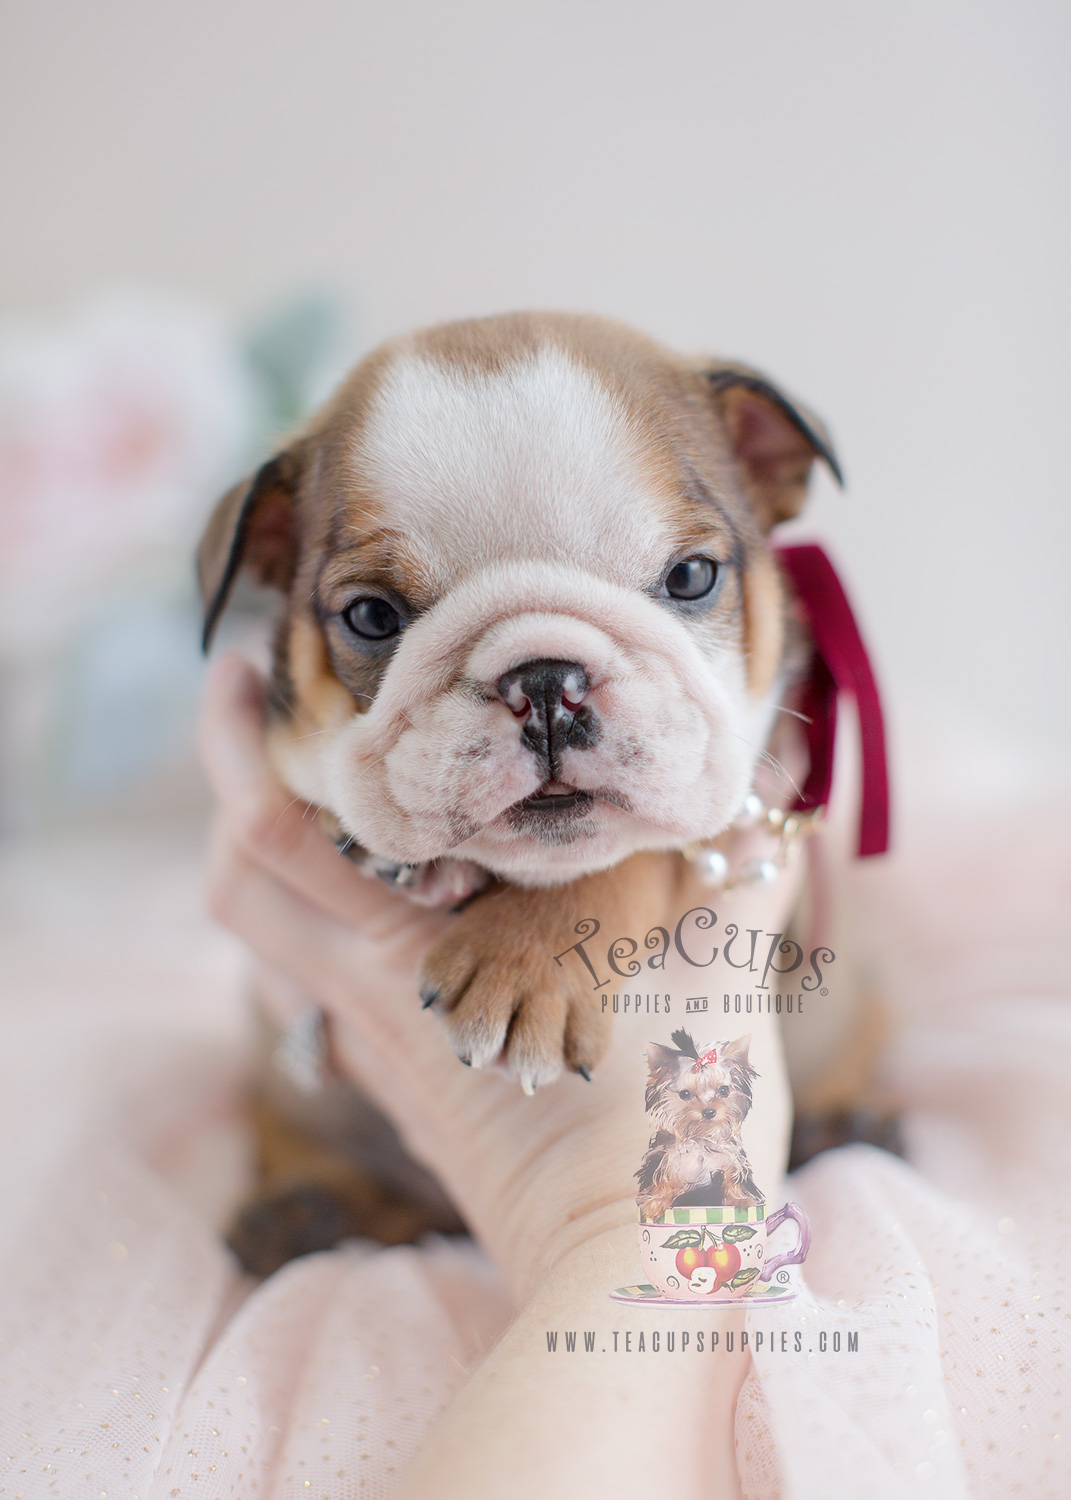 Teacup Puppies and English Bulldogs For Sale in South Florida